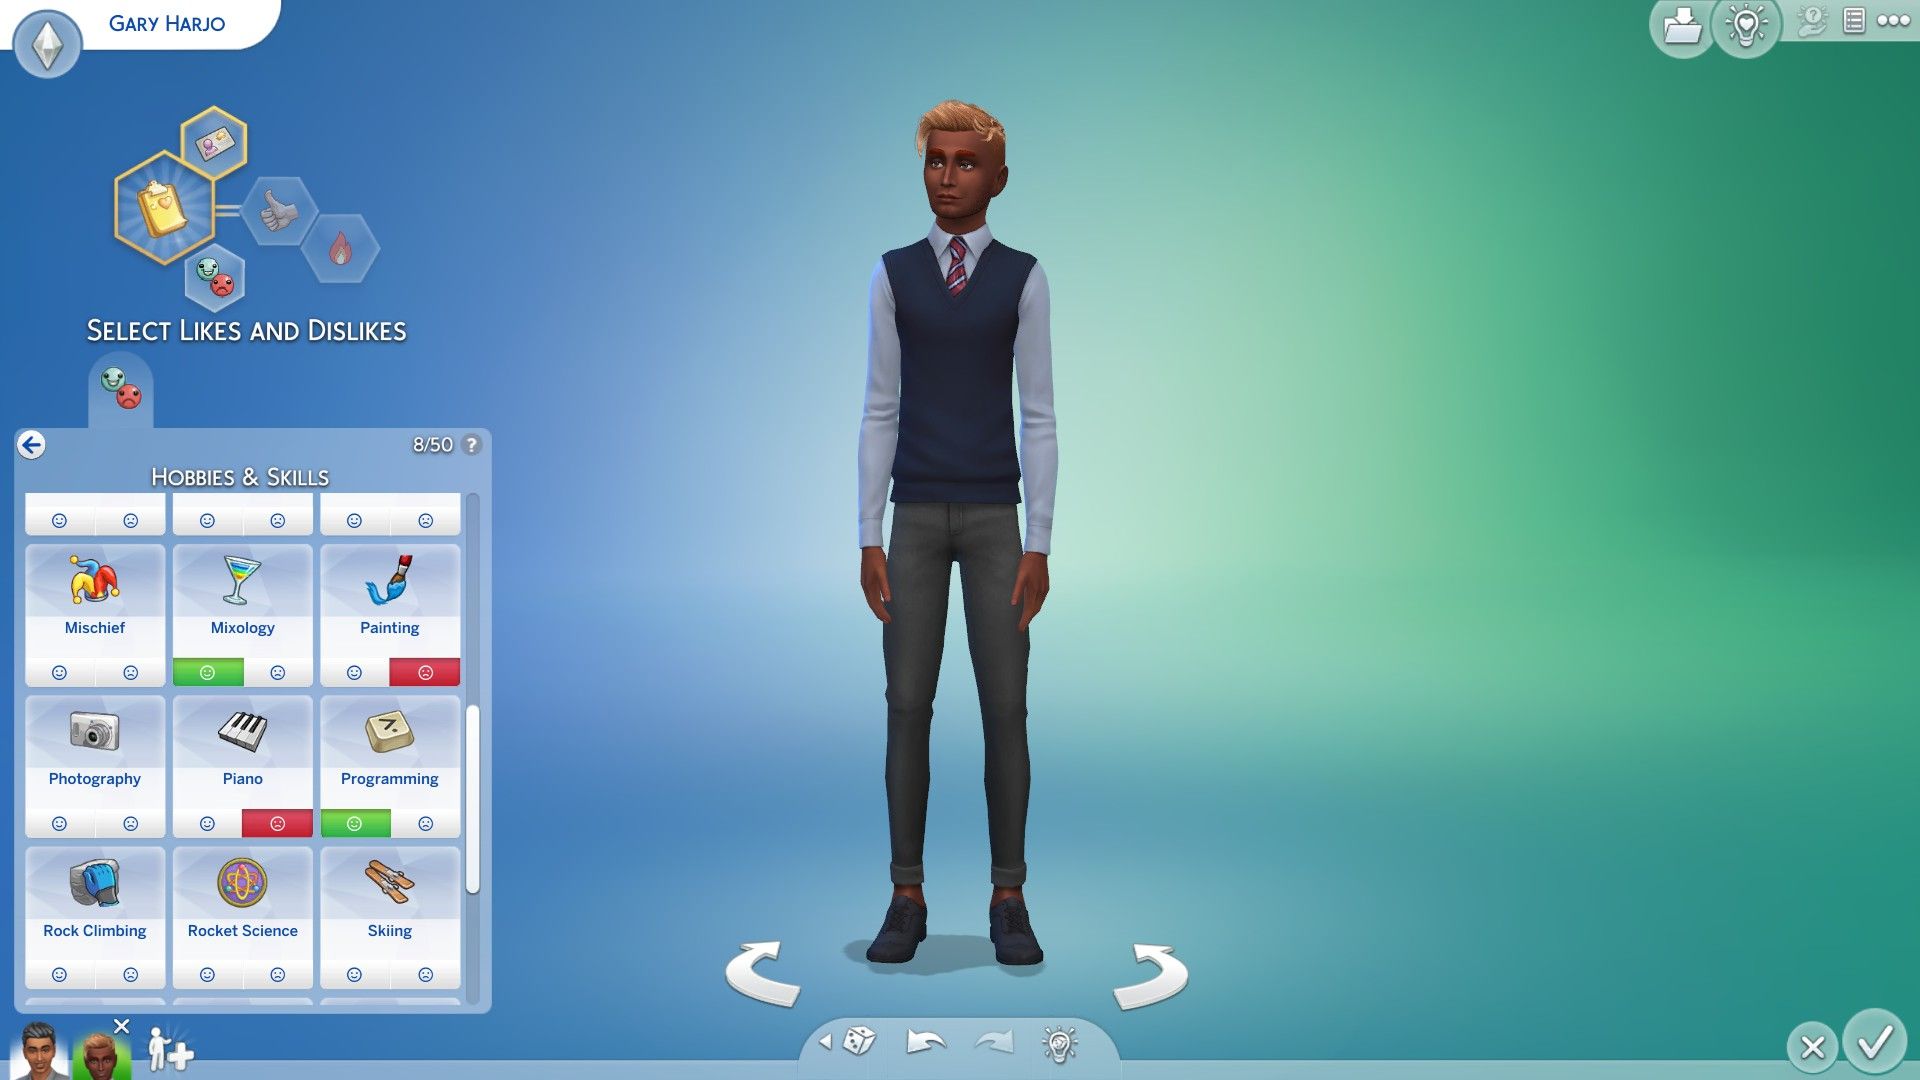 10 Best Ways To Build Relationships In Sims 4 (Traits, Interactions)